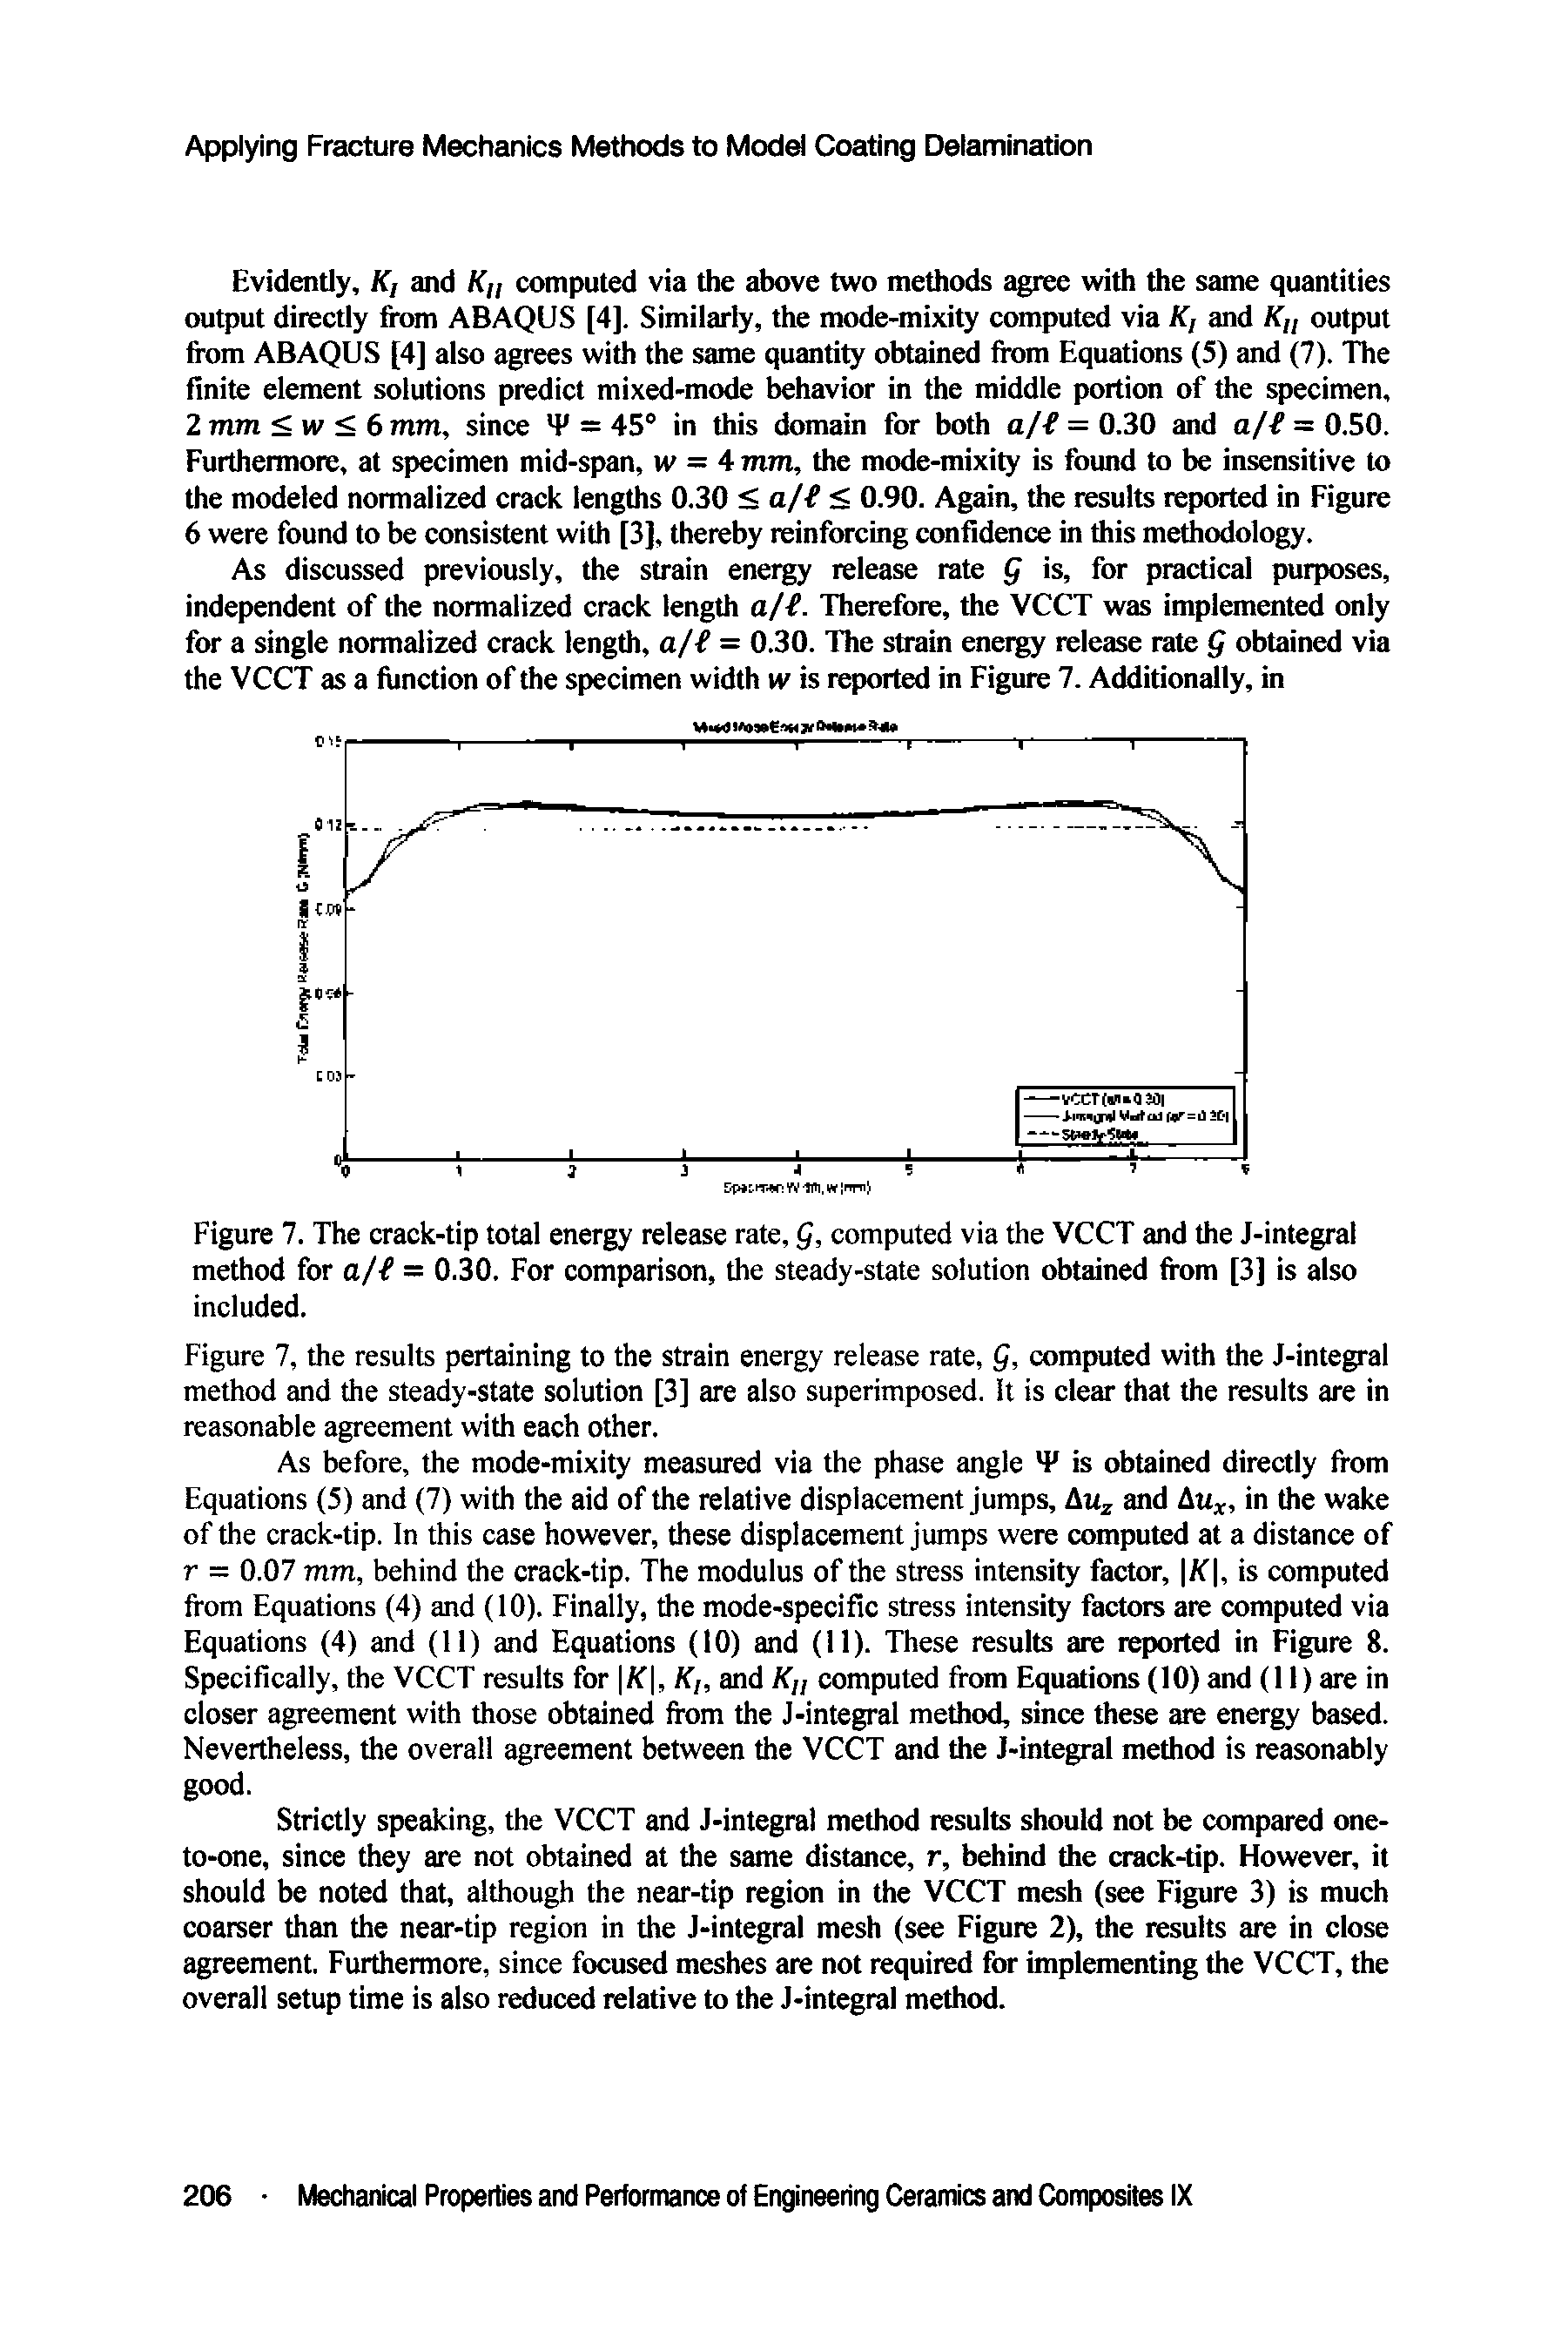 Figure 7. The crack-tip total energy release rate, g, computed via the VCCT and the J-integral method for a/f = 0.30. For comparison, the steady-state solution obtained from [3] is also included.